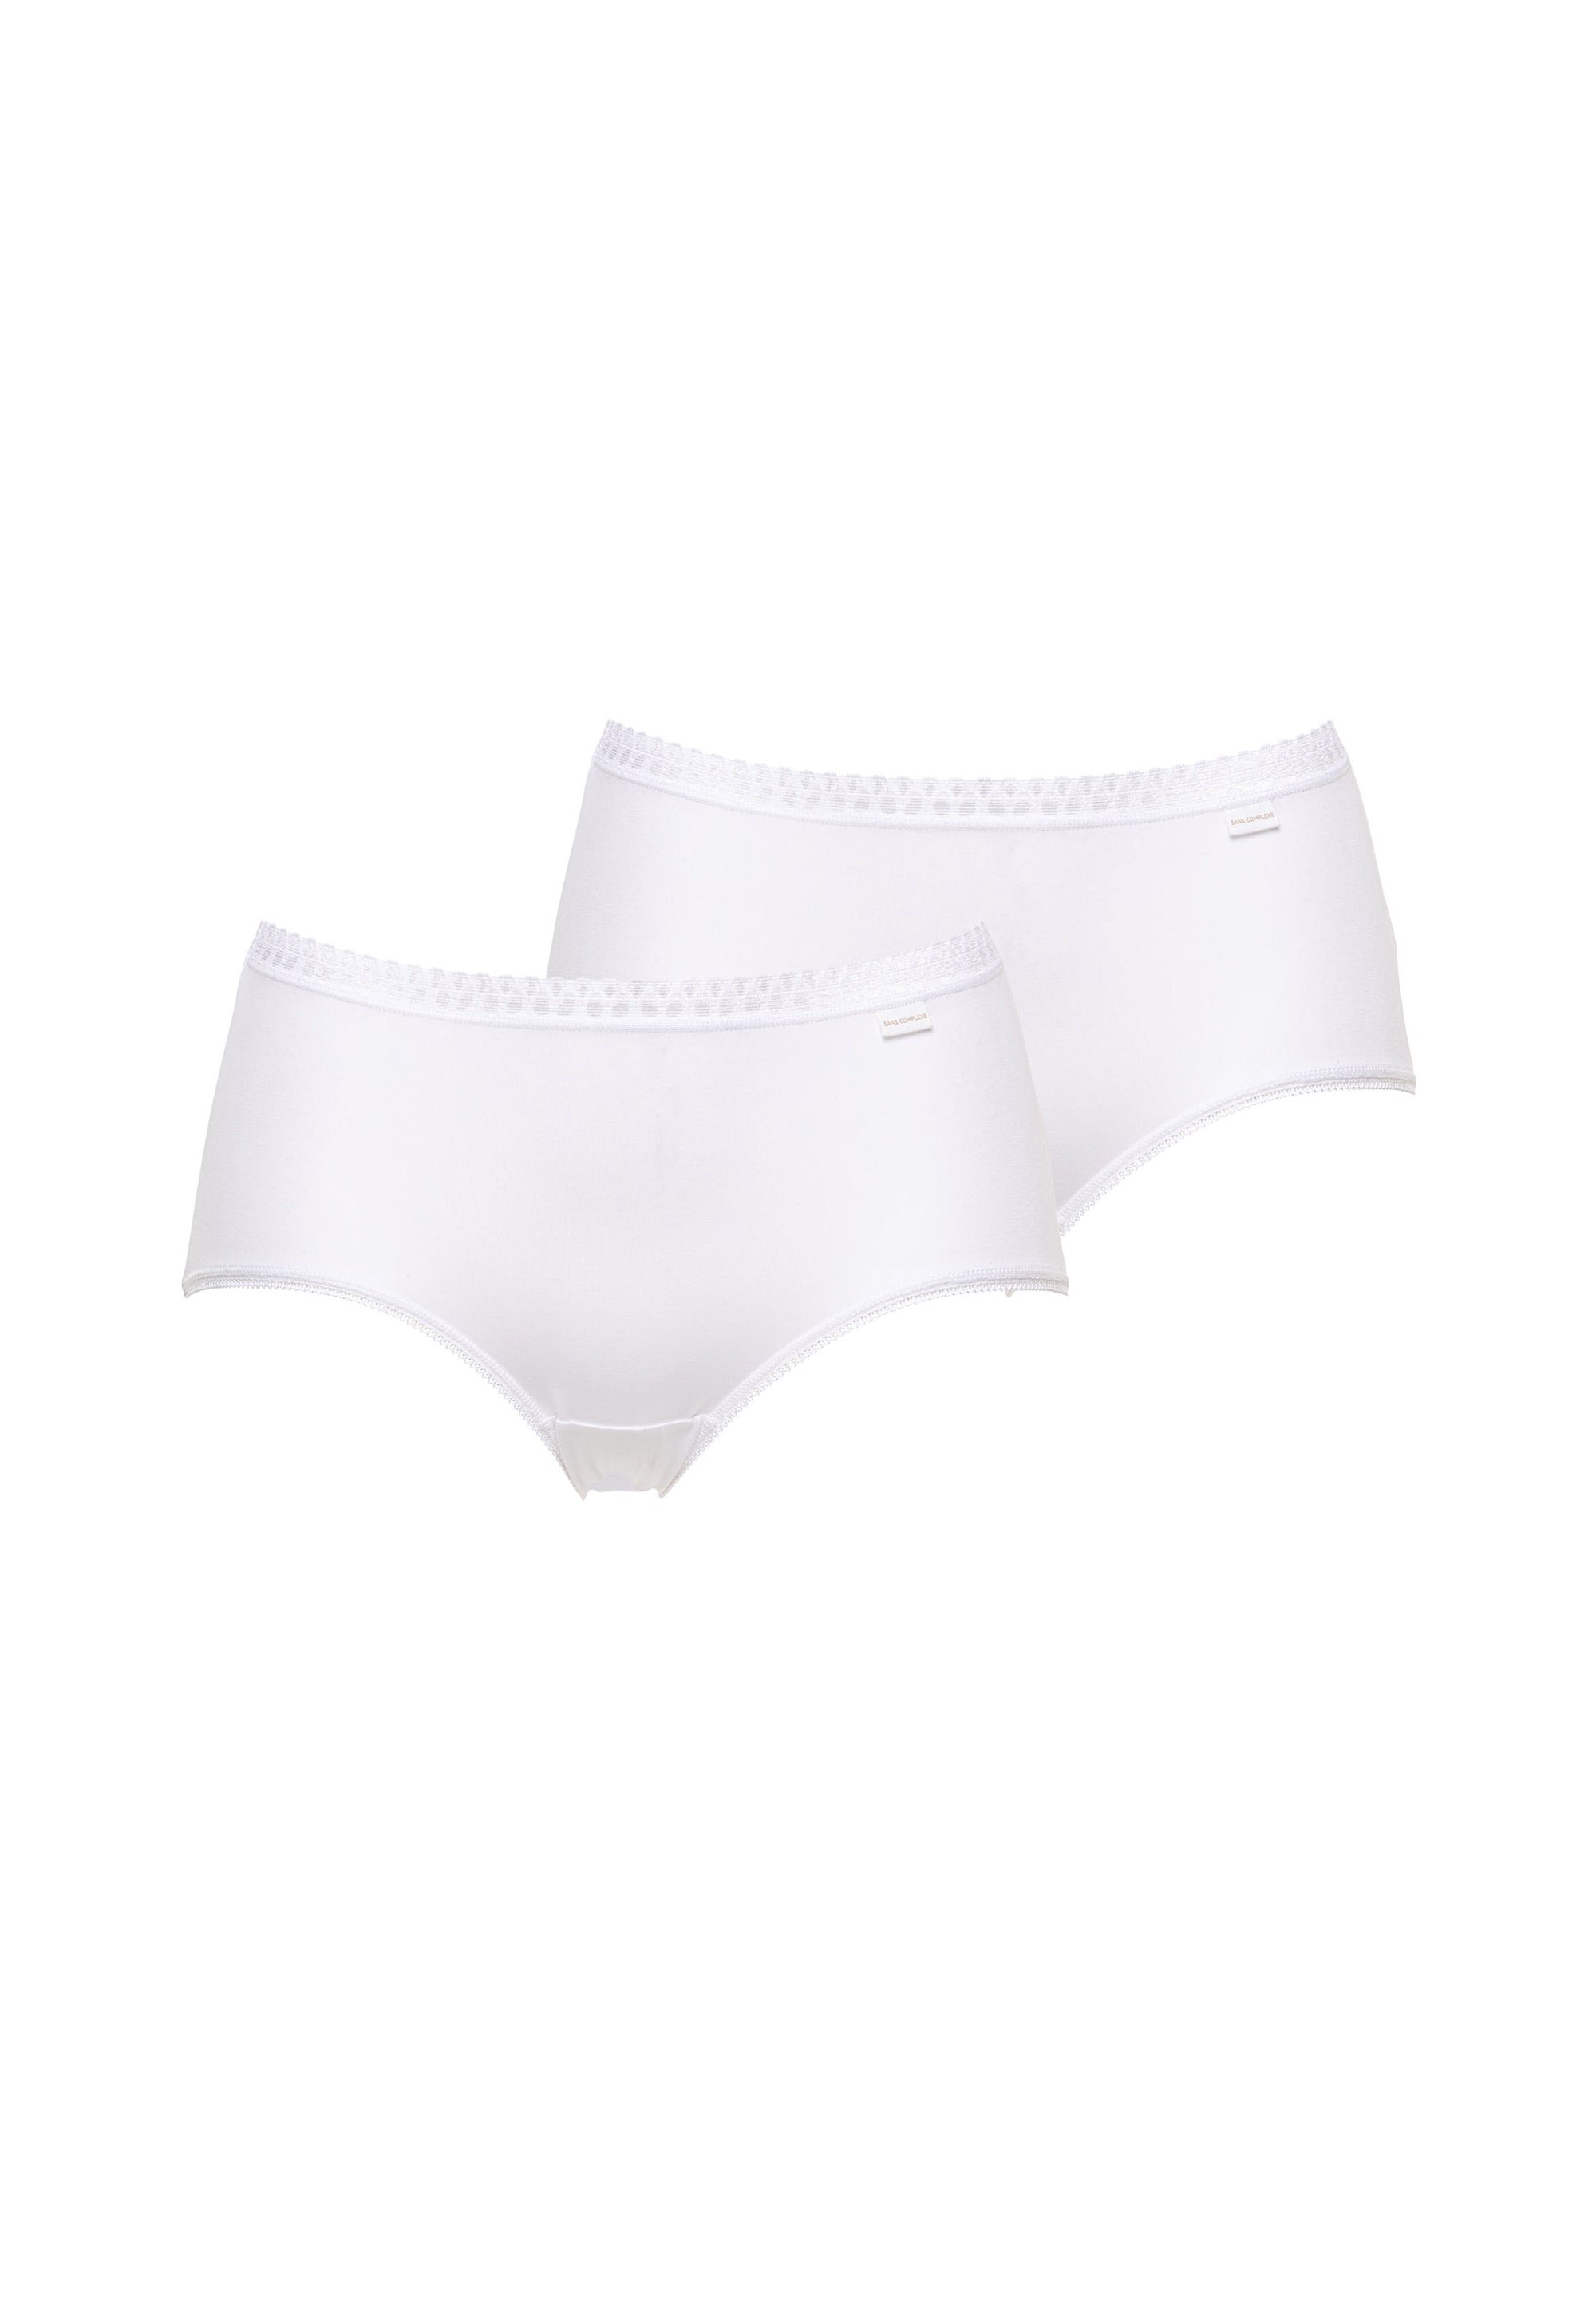 Briefs - Pack of 2 Classic White Cotton